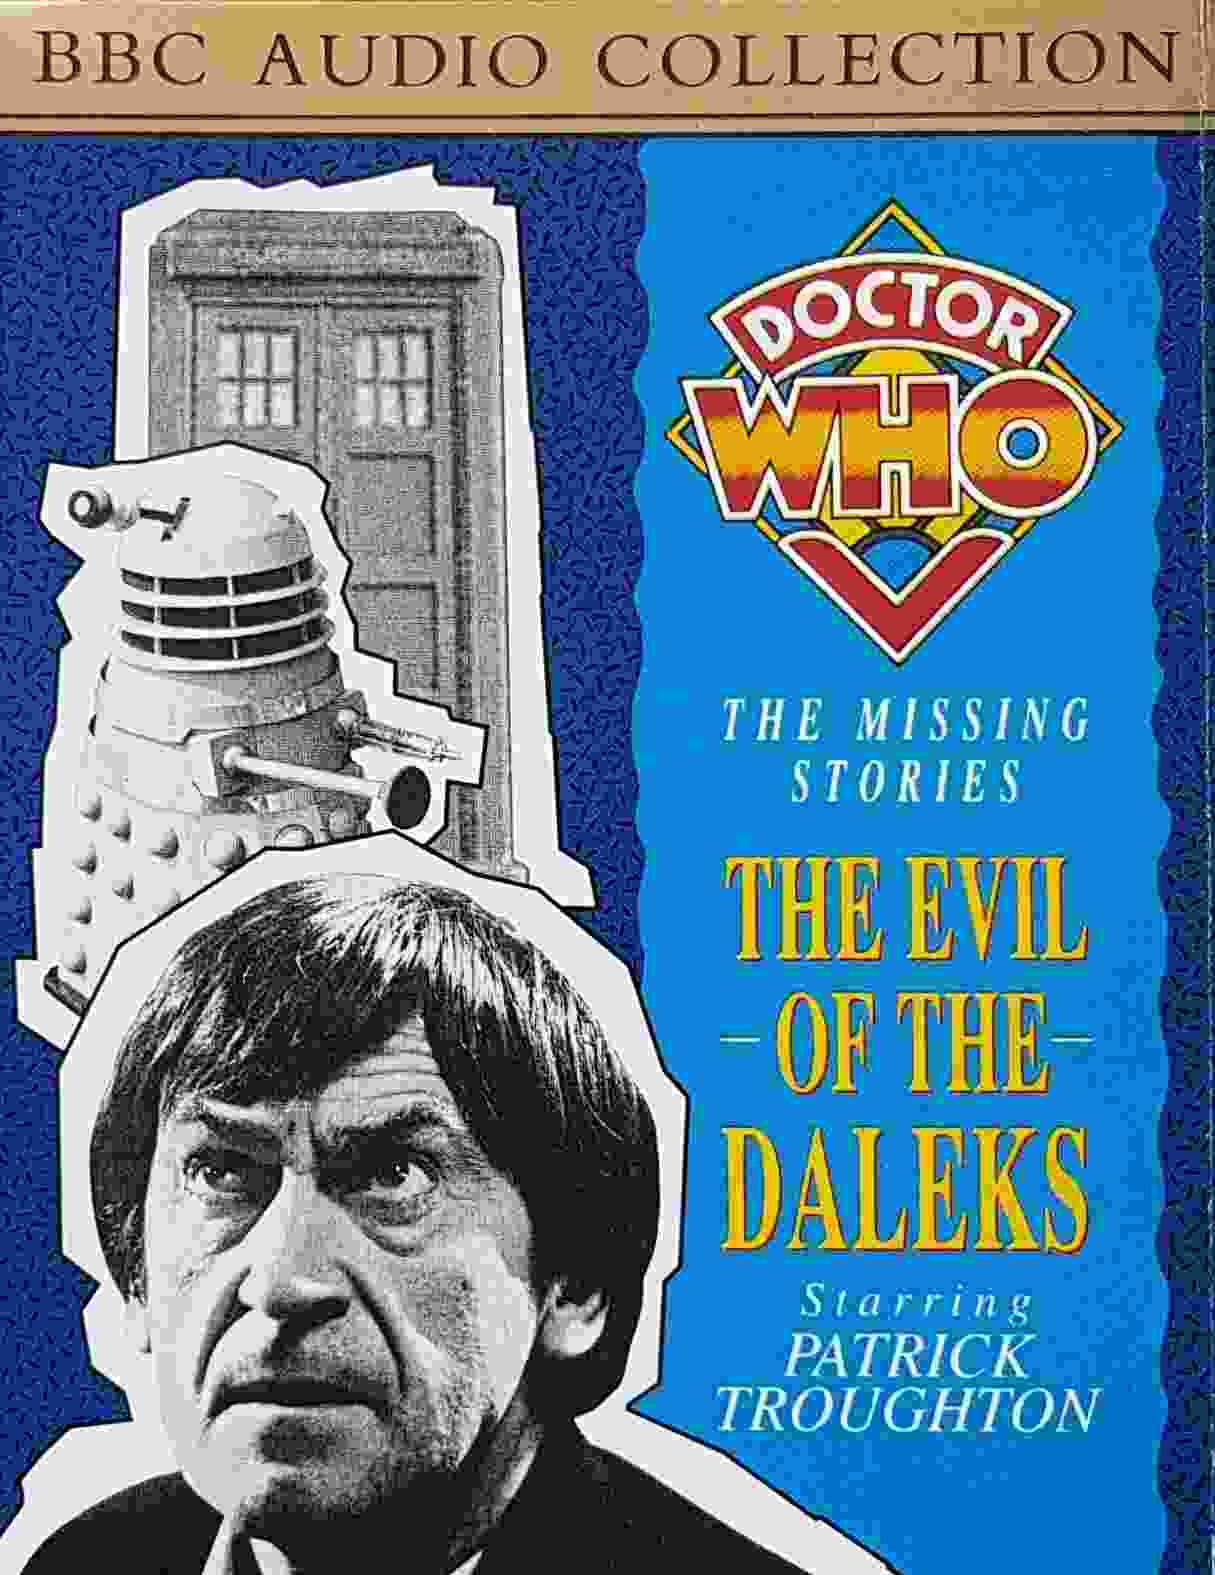 Picture of Doctor Who - The evil of the Daleks by artist David Whitaker from the BBC cassettes - Records and Tapes library